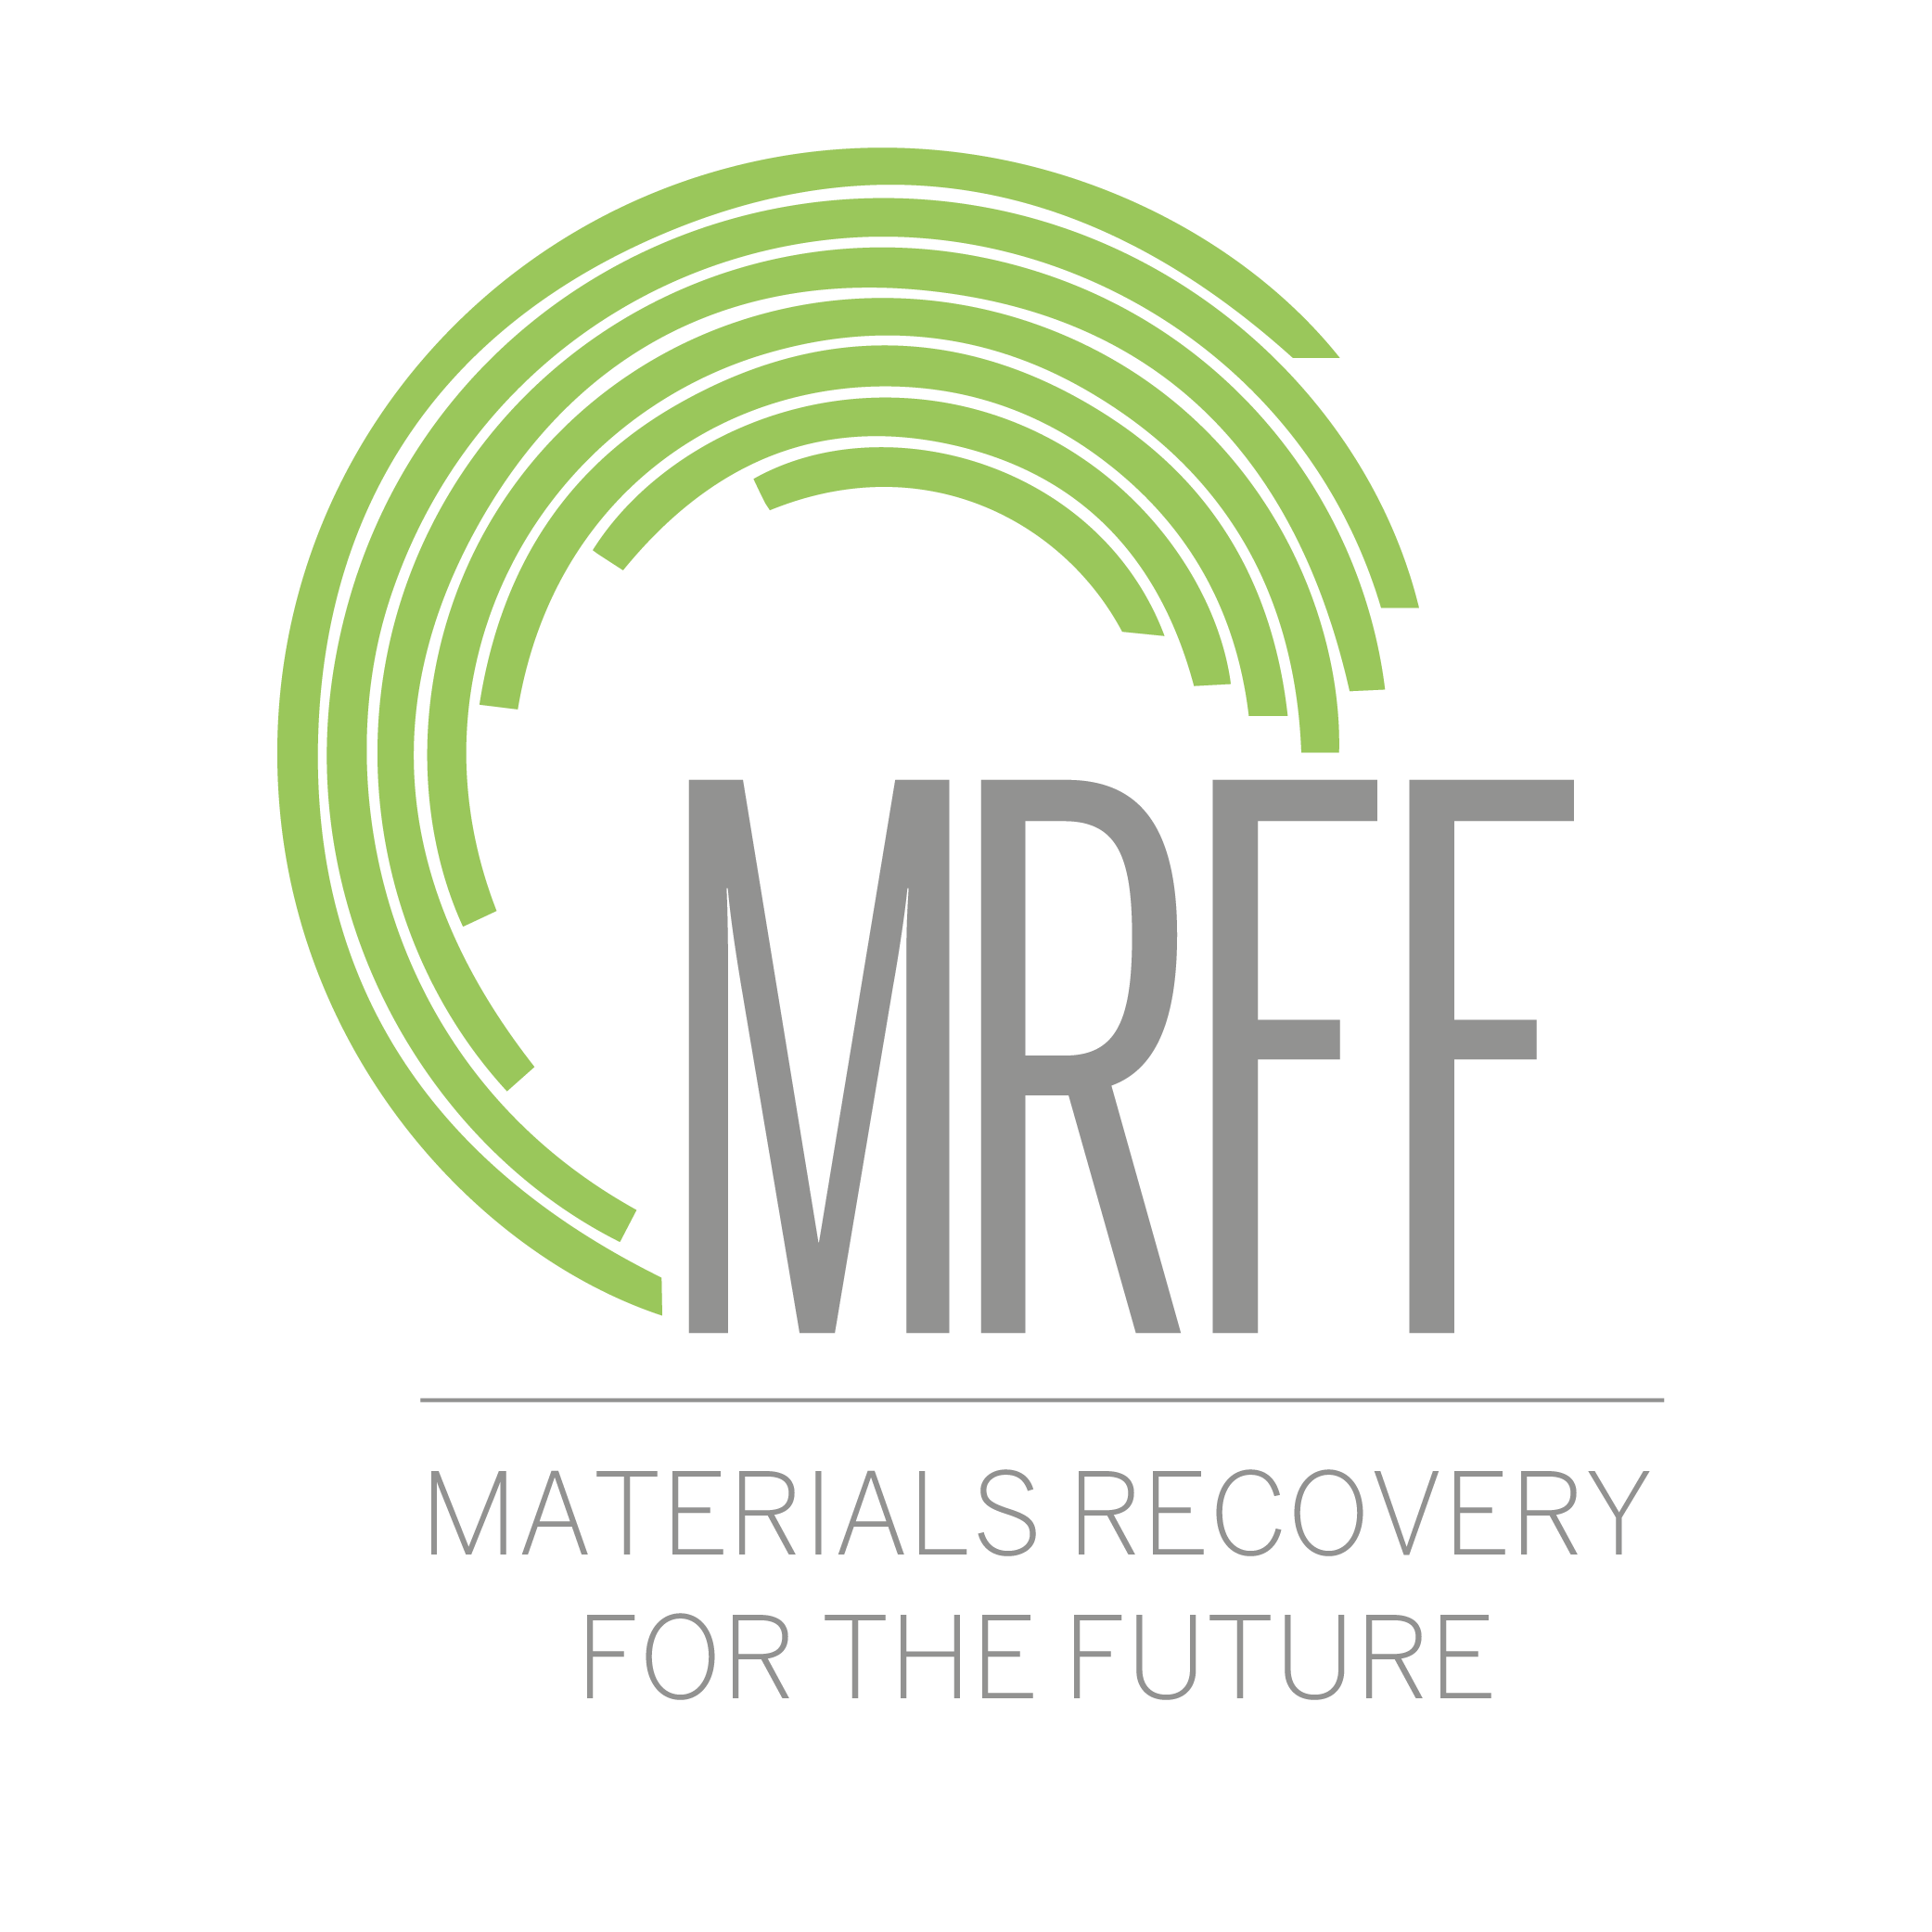 MRFF materials recovery for the future logo